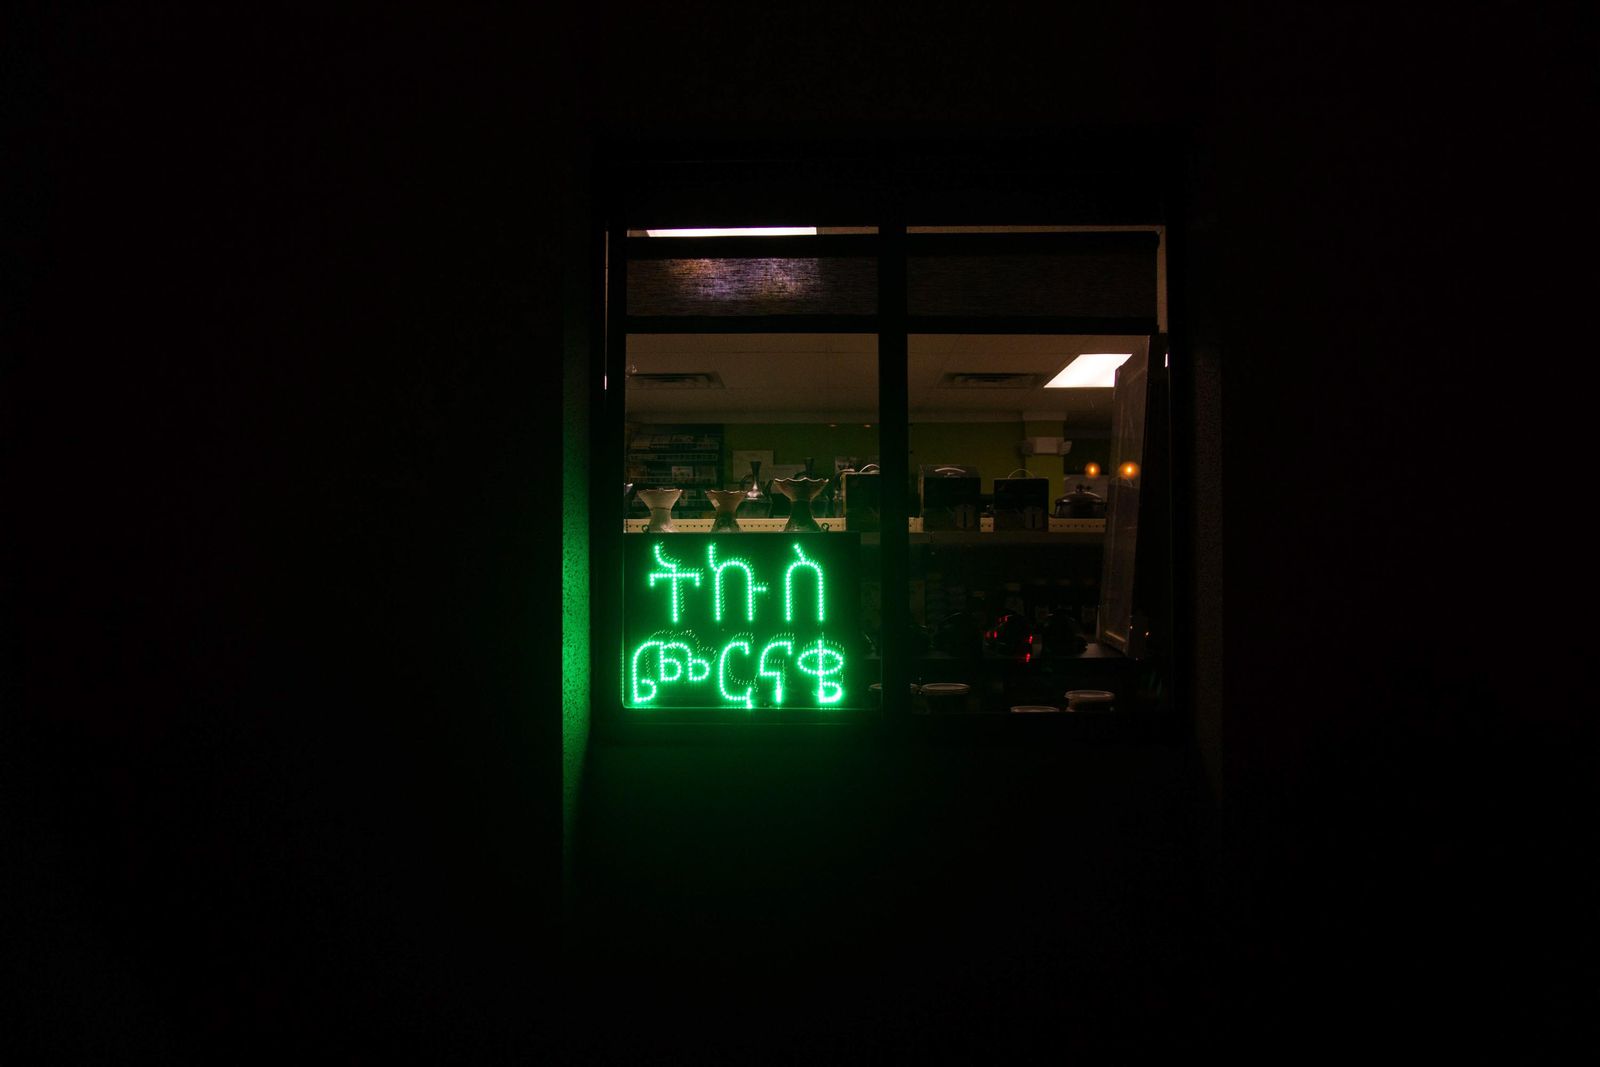 © Hilina Abebe - A sign in Amharic for fresh snack is displayed in one of the Ethiopian owned stores in Falls Church, VA.